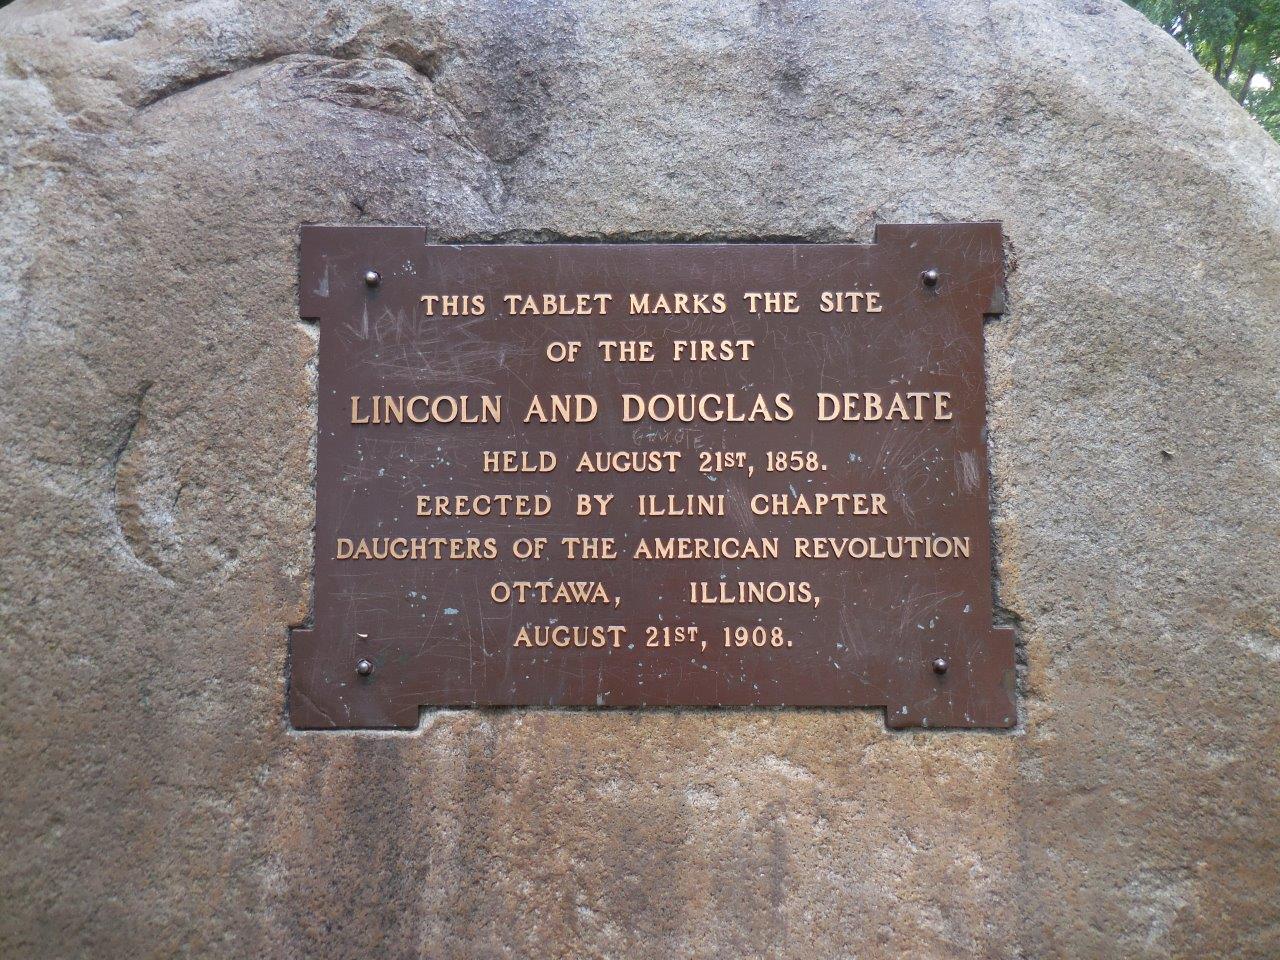 Historical marker at site of first Lincoln-Douglas debate